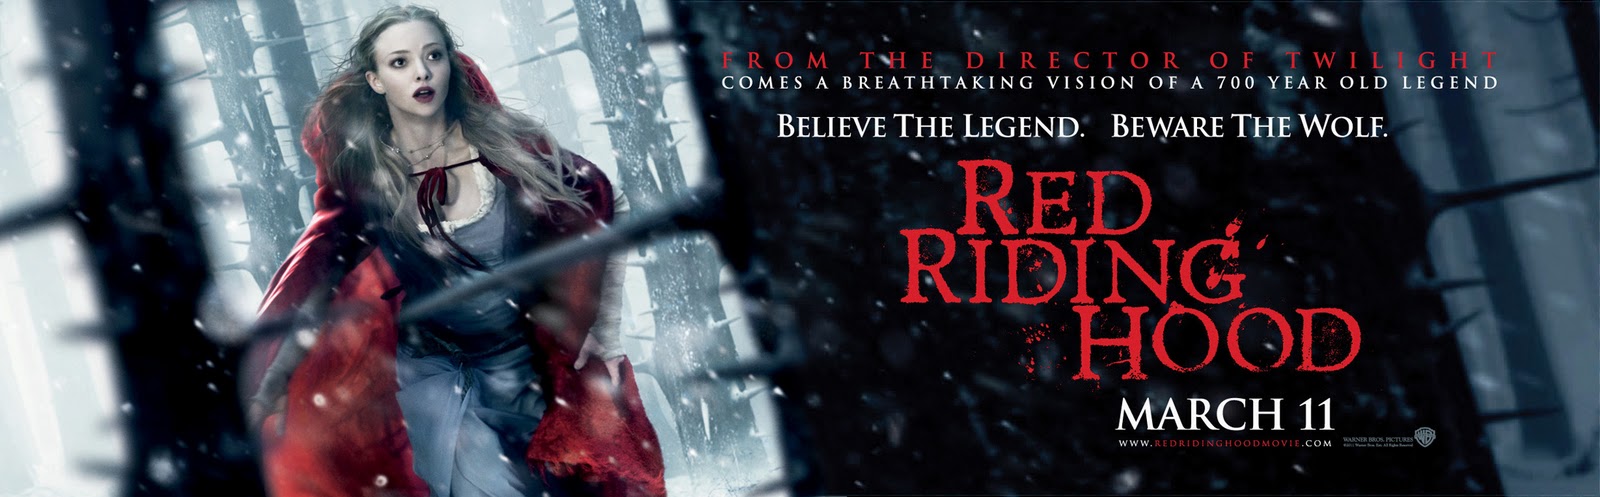 Red Riding Hood HD Wallpaper And Posters